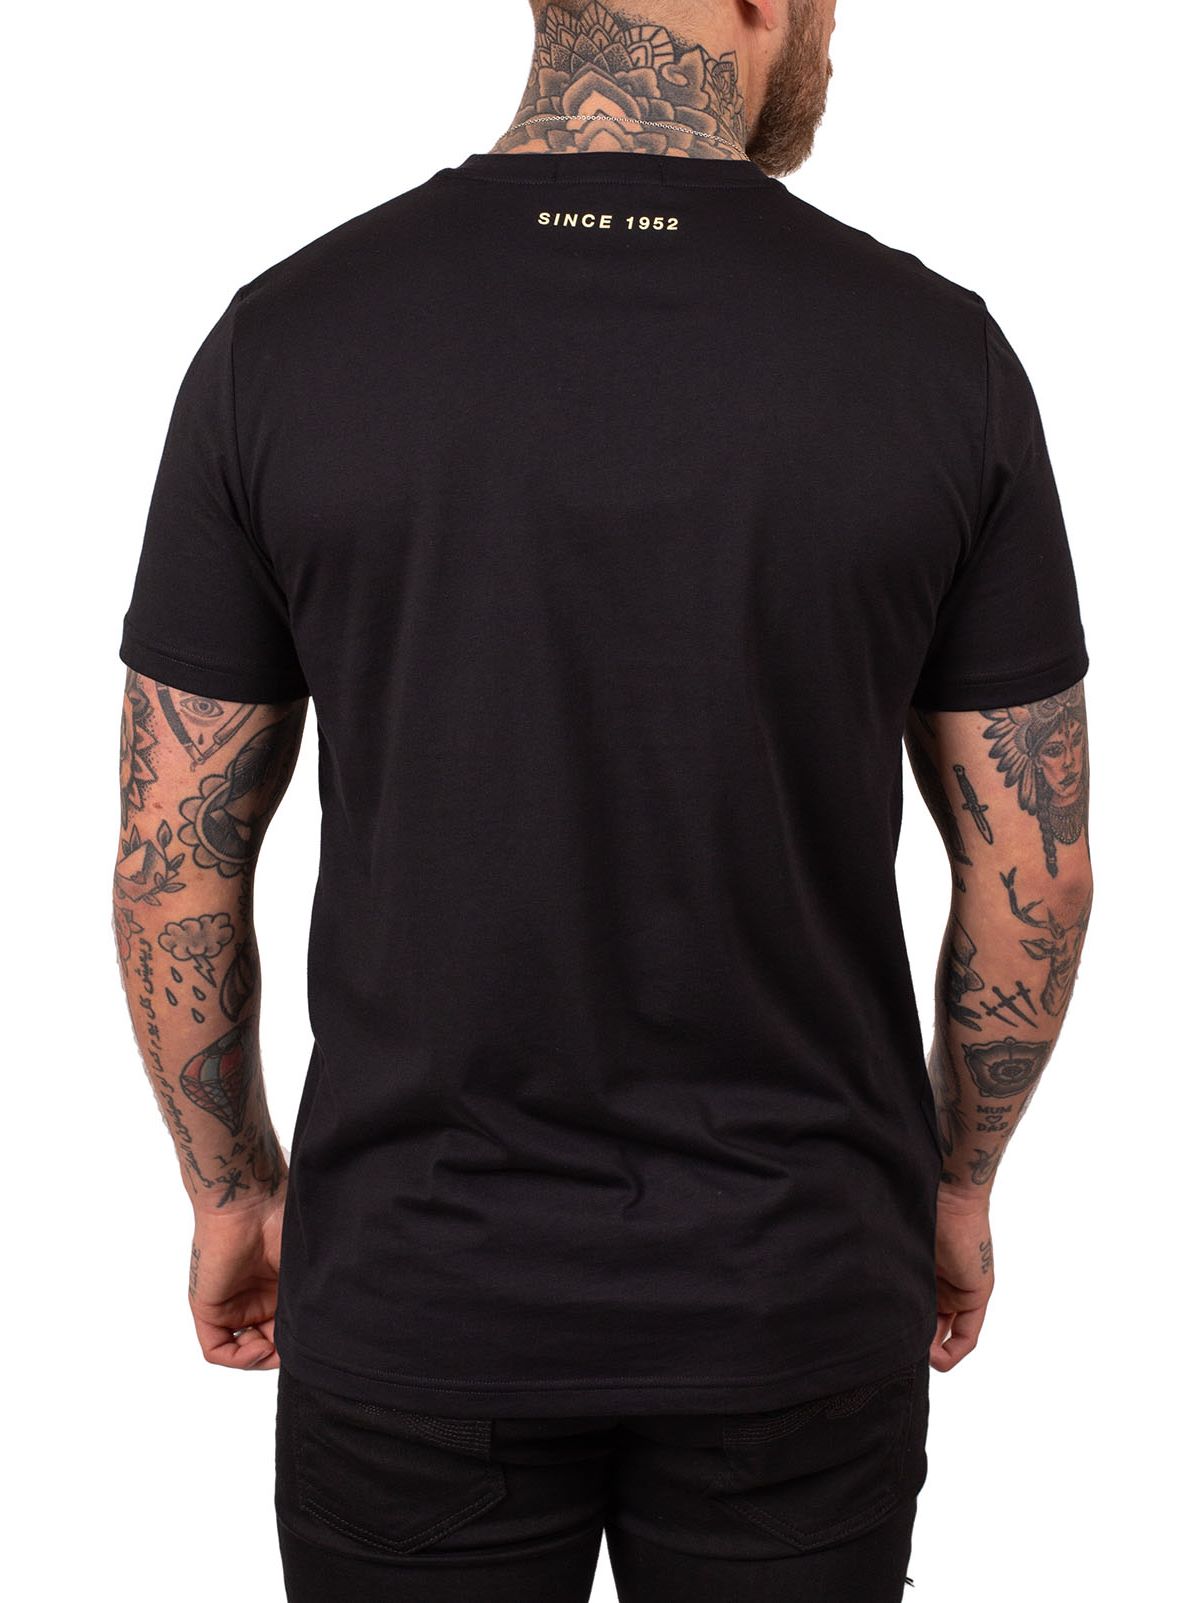 Fred Perry Mixed Graphic T-Shirt in Black | Dapper Street